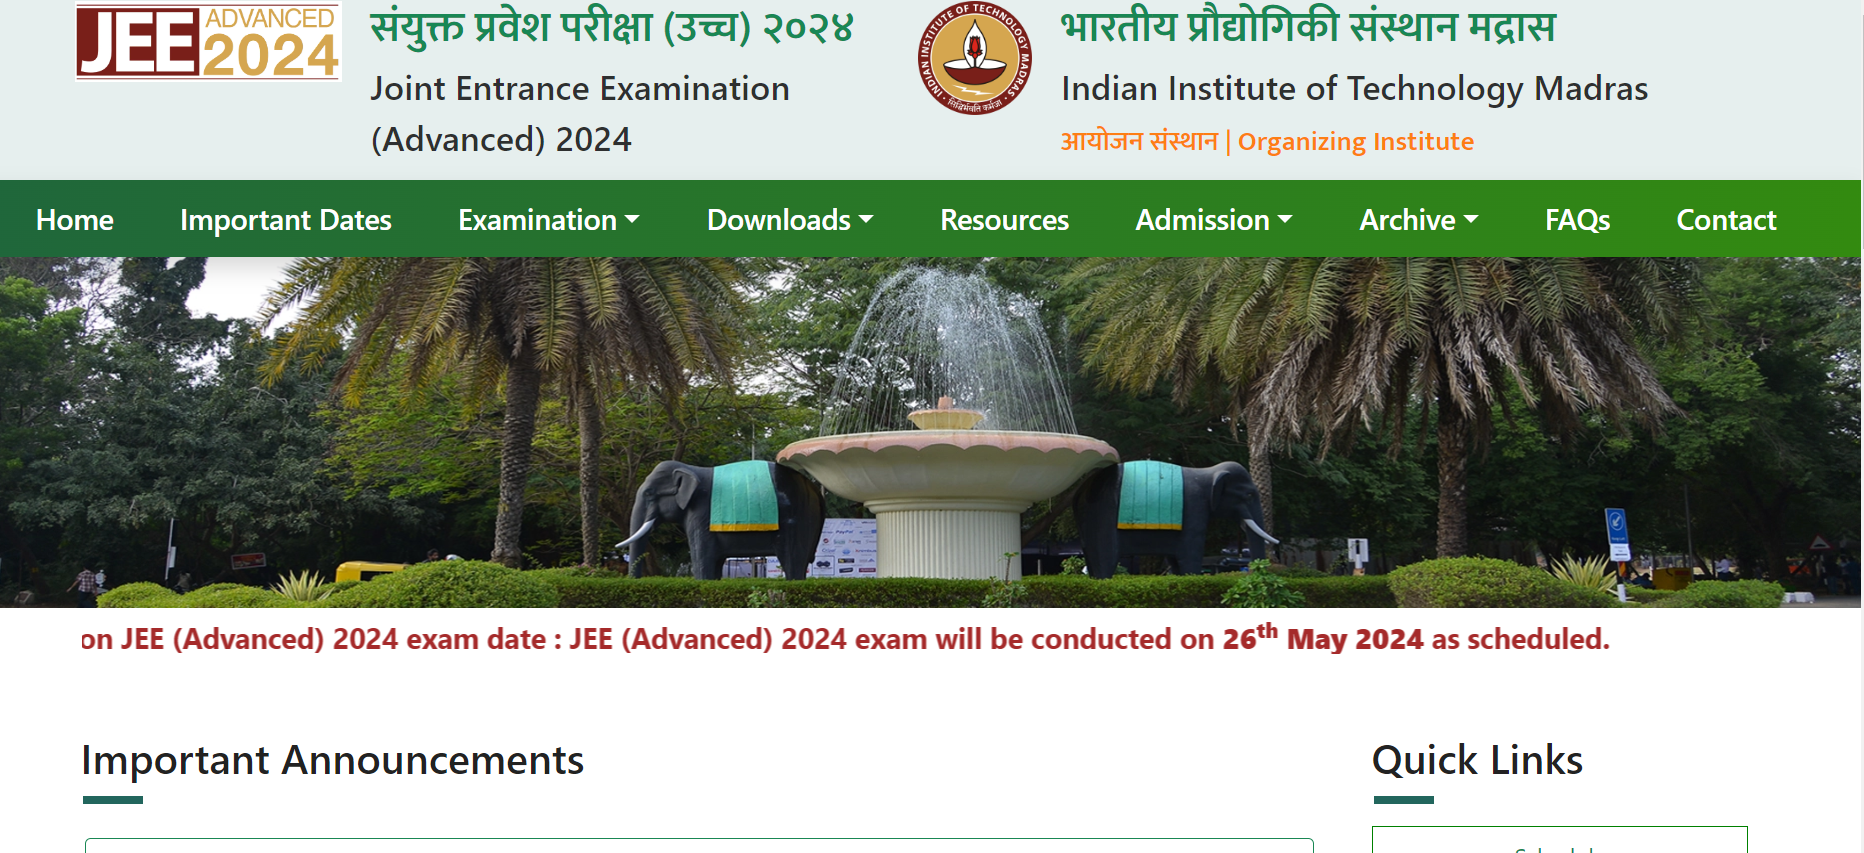 JEE Advanced Centres 2024 List Released, Check Complete List Here